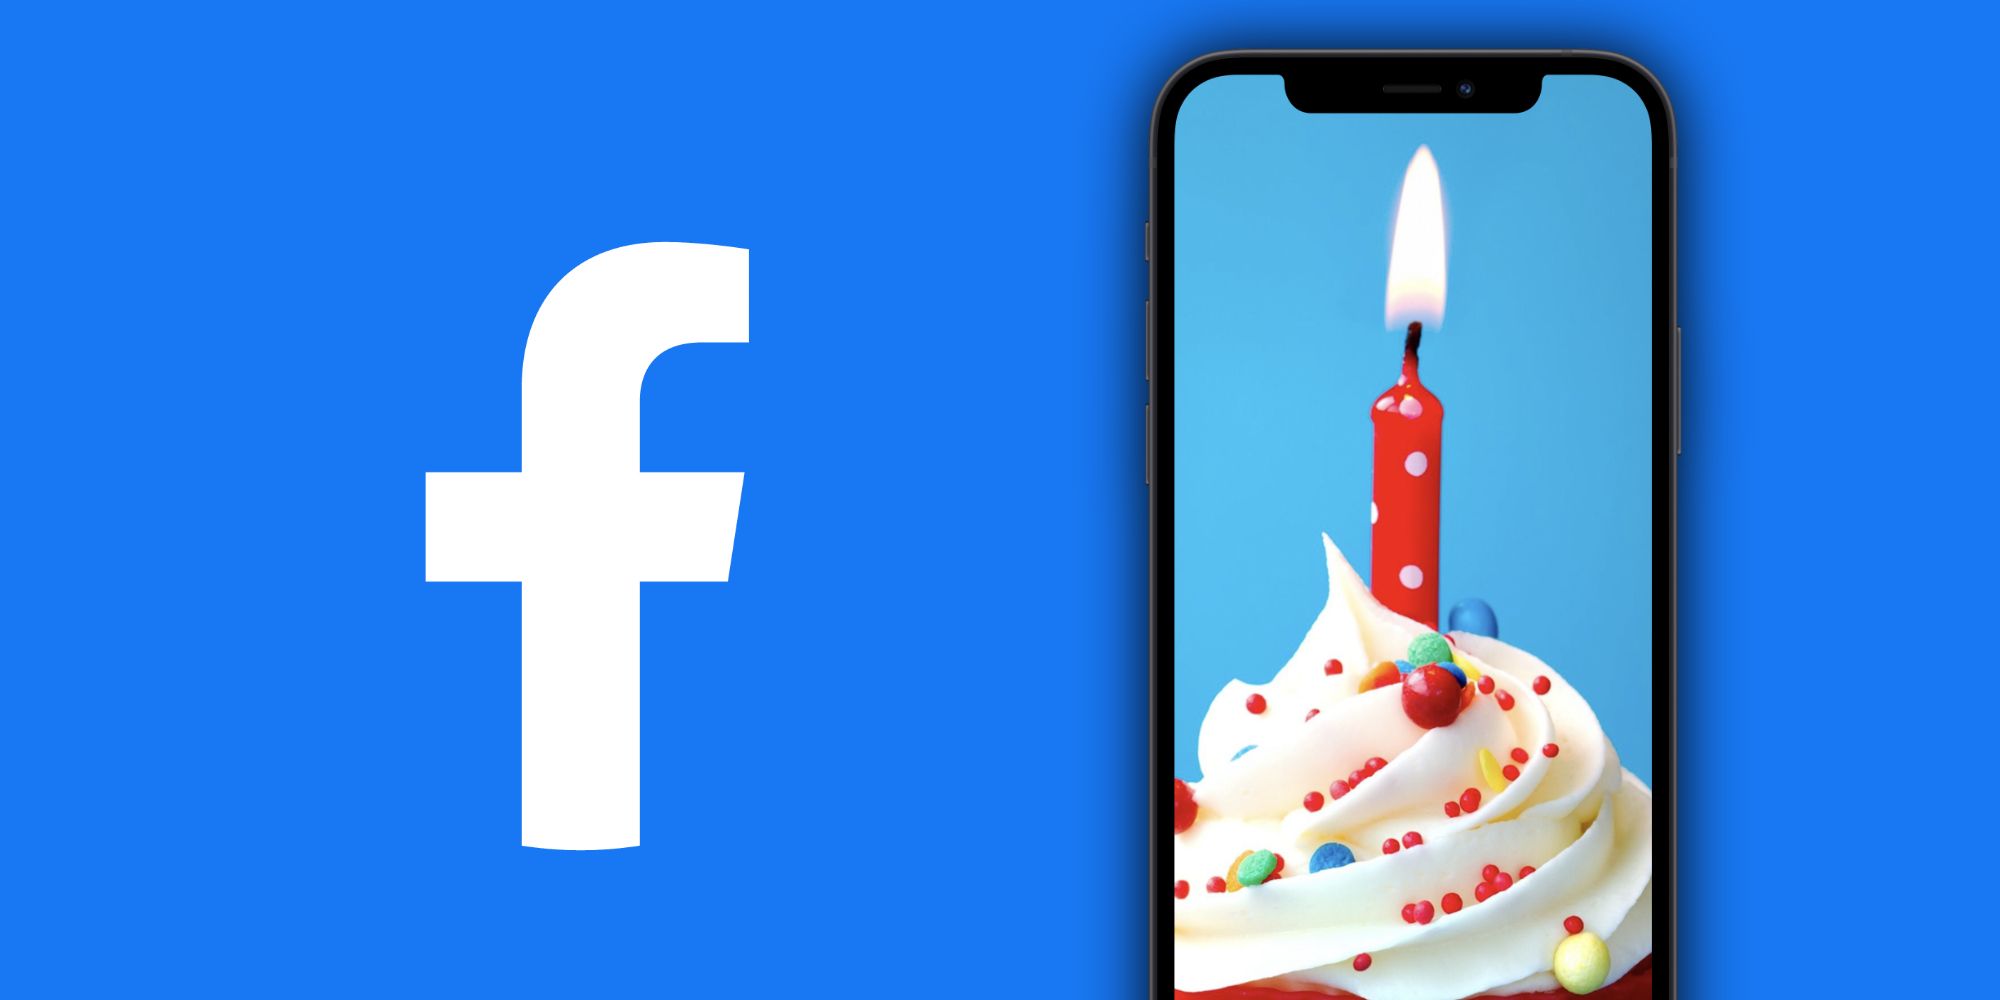 Facebook logo next to a phone showing image of a birthday cake